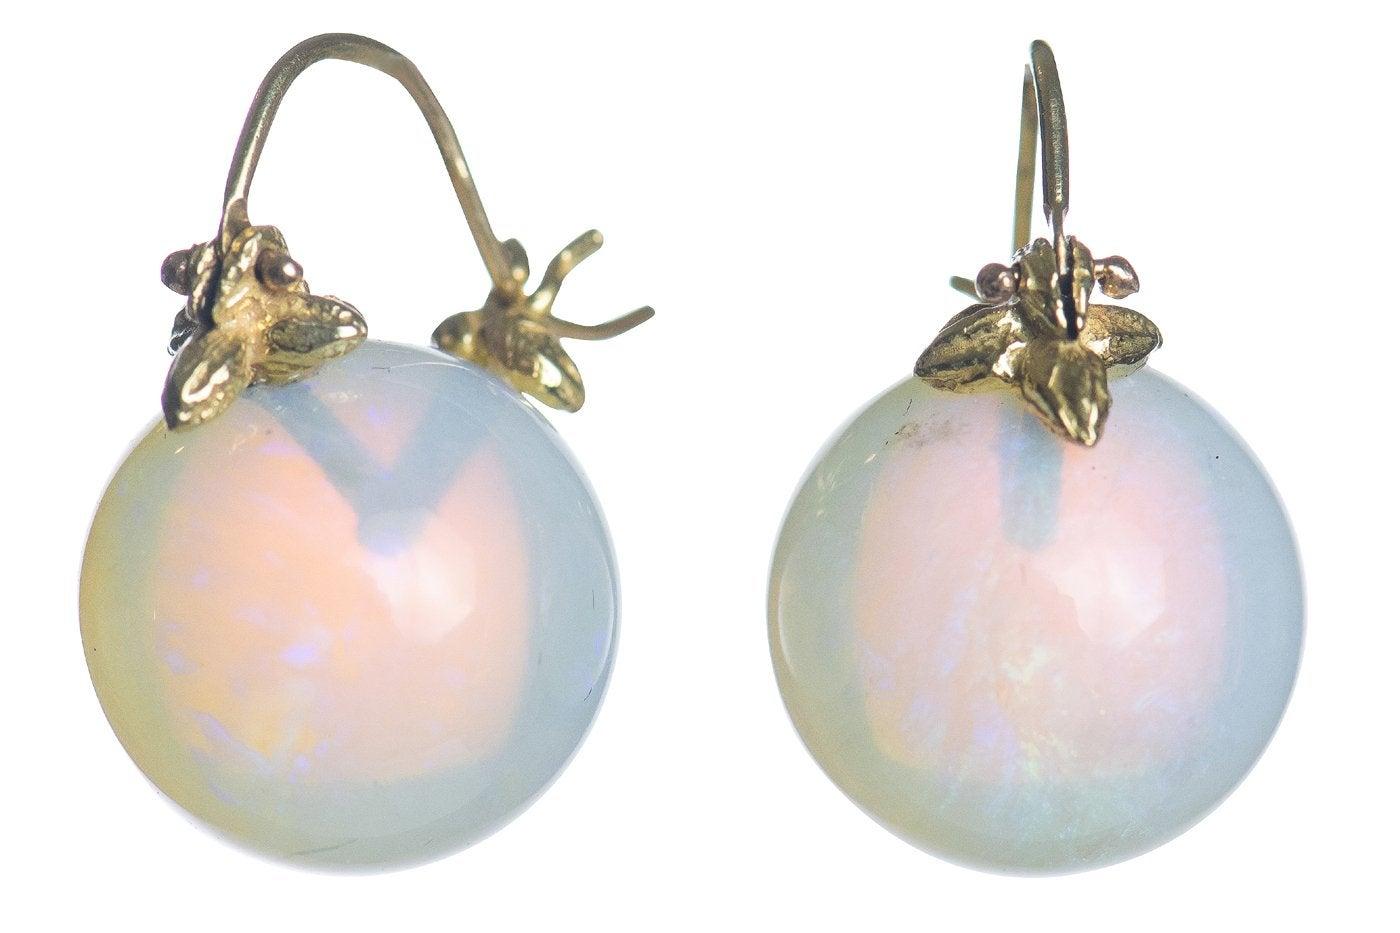 Breathtaking: these flawless 13mm smooth round Ethiopian opals possess both fire and water, with their trademark color that is somehow milky blue-green and golden warmth at once. On the signature 18k Flyer setting.

GS513EtOp-1  13mm smooth round